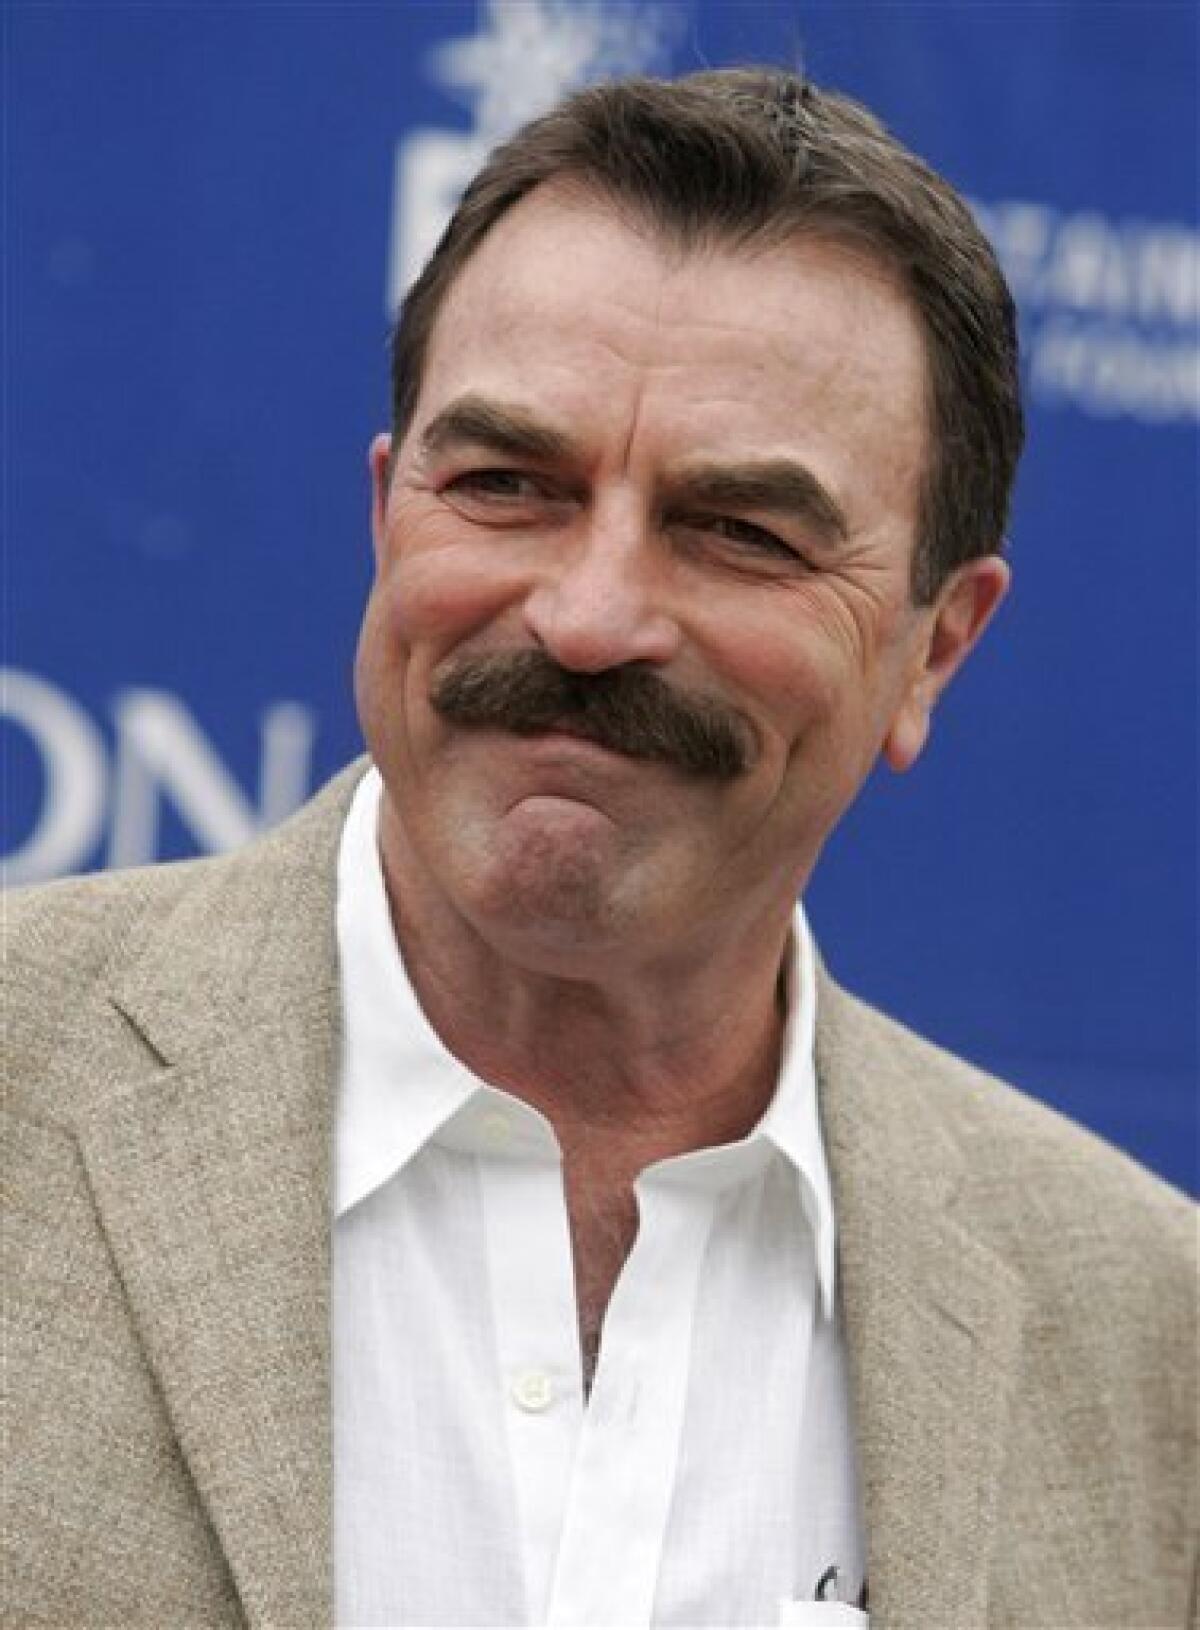 In this Saturday, May 10, 2008 photo, actor Tom Selleck arrives at the 15th Annual Entertainment Industry Foundation Revlon Run/Walk For Women in Los Angeles. Actor Tom Selleck has been awarded more than $187,000 after a California jury found the actor was duped into buying a lame horse. (AP Photo/Dan Steinberg)